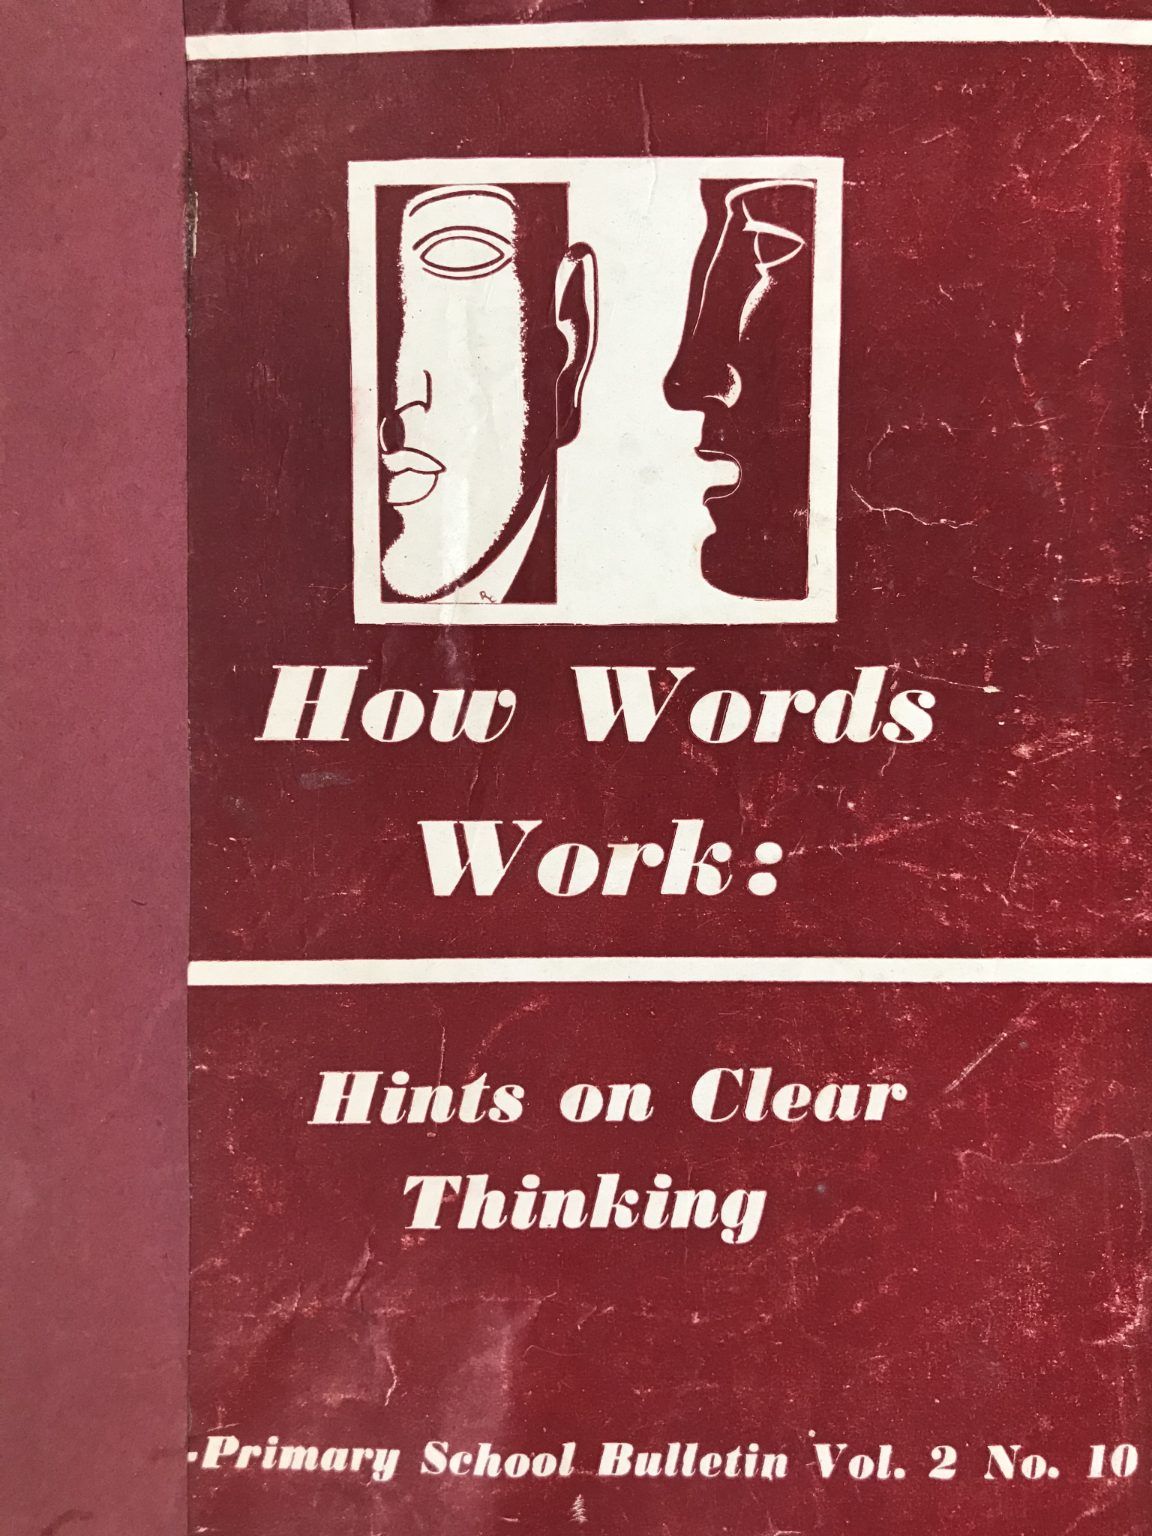 HOW WORDS WORK: Hints on Clear Thinking